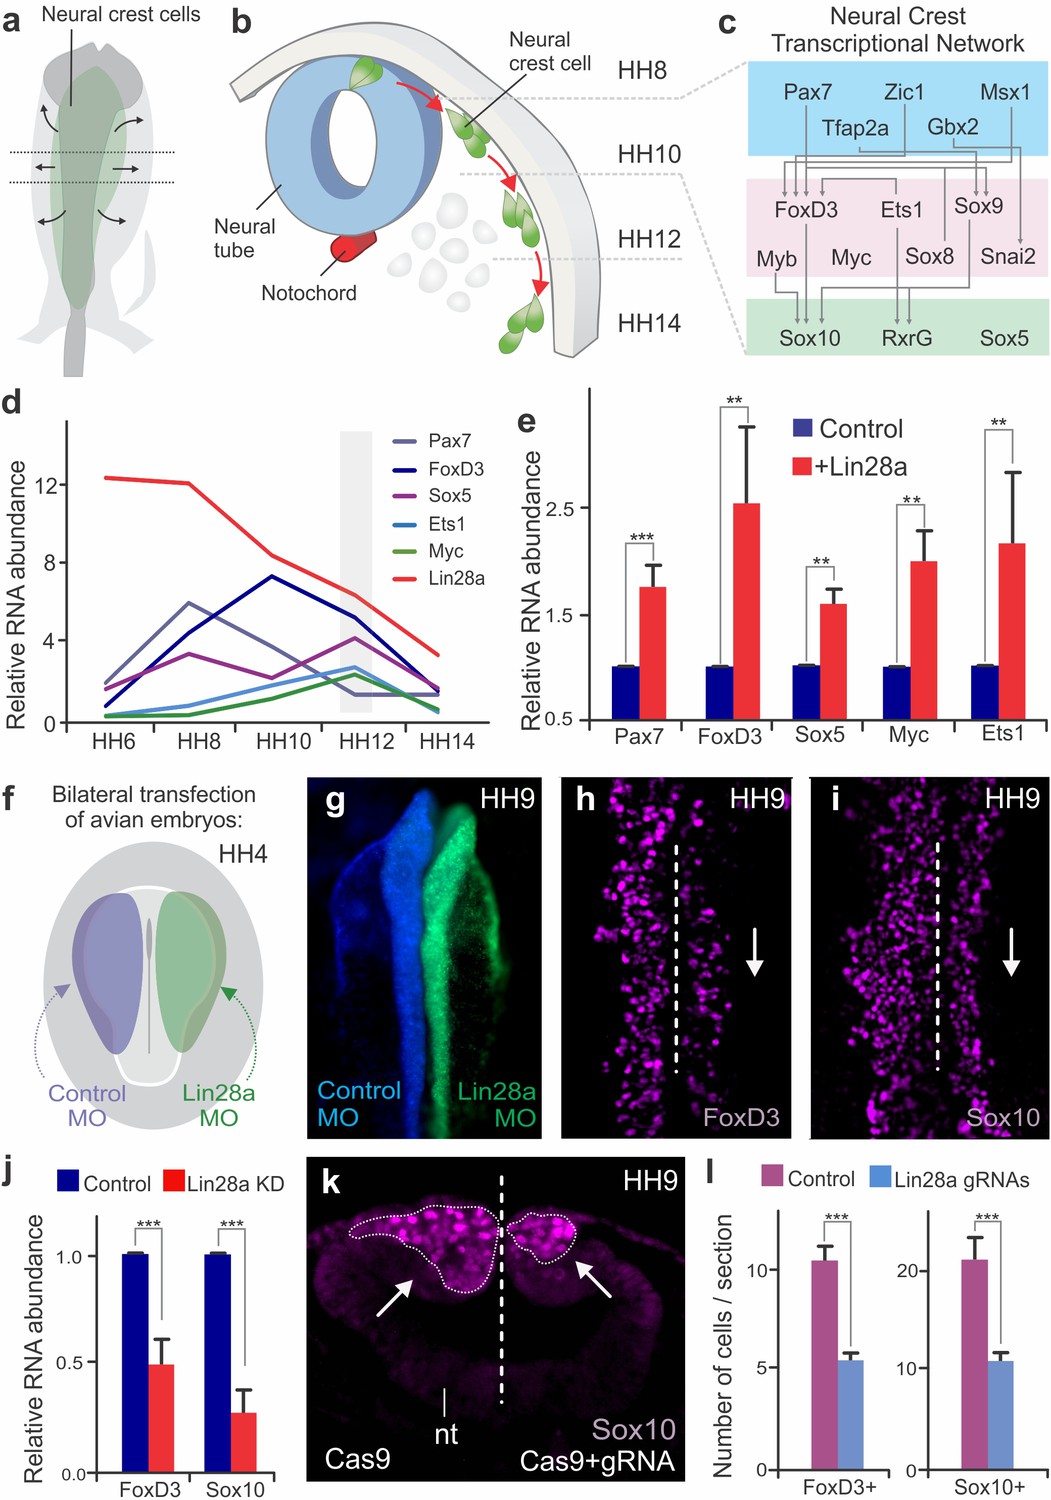 Control of neural crest multipotency by Wnt signaling and the Lin28/let-7 axis                    A neuroepithelial wave of BMP signalling drives anteroposterior specification of the tuberal hypothalamus                                      Bilateral JNK activation is a hallmark of interface surveillance and promotes elimination of aberrant cells                                      Coordinated cadherin functions sculpt respiratory motor circuit connectivity